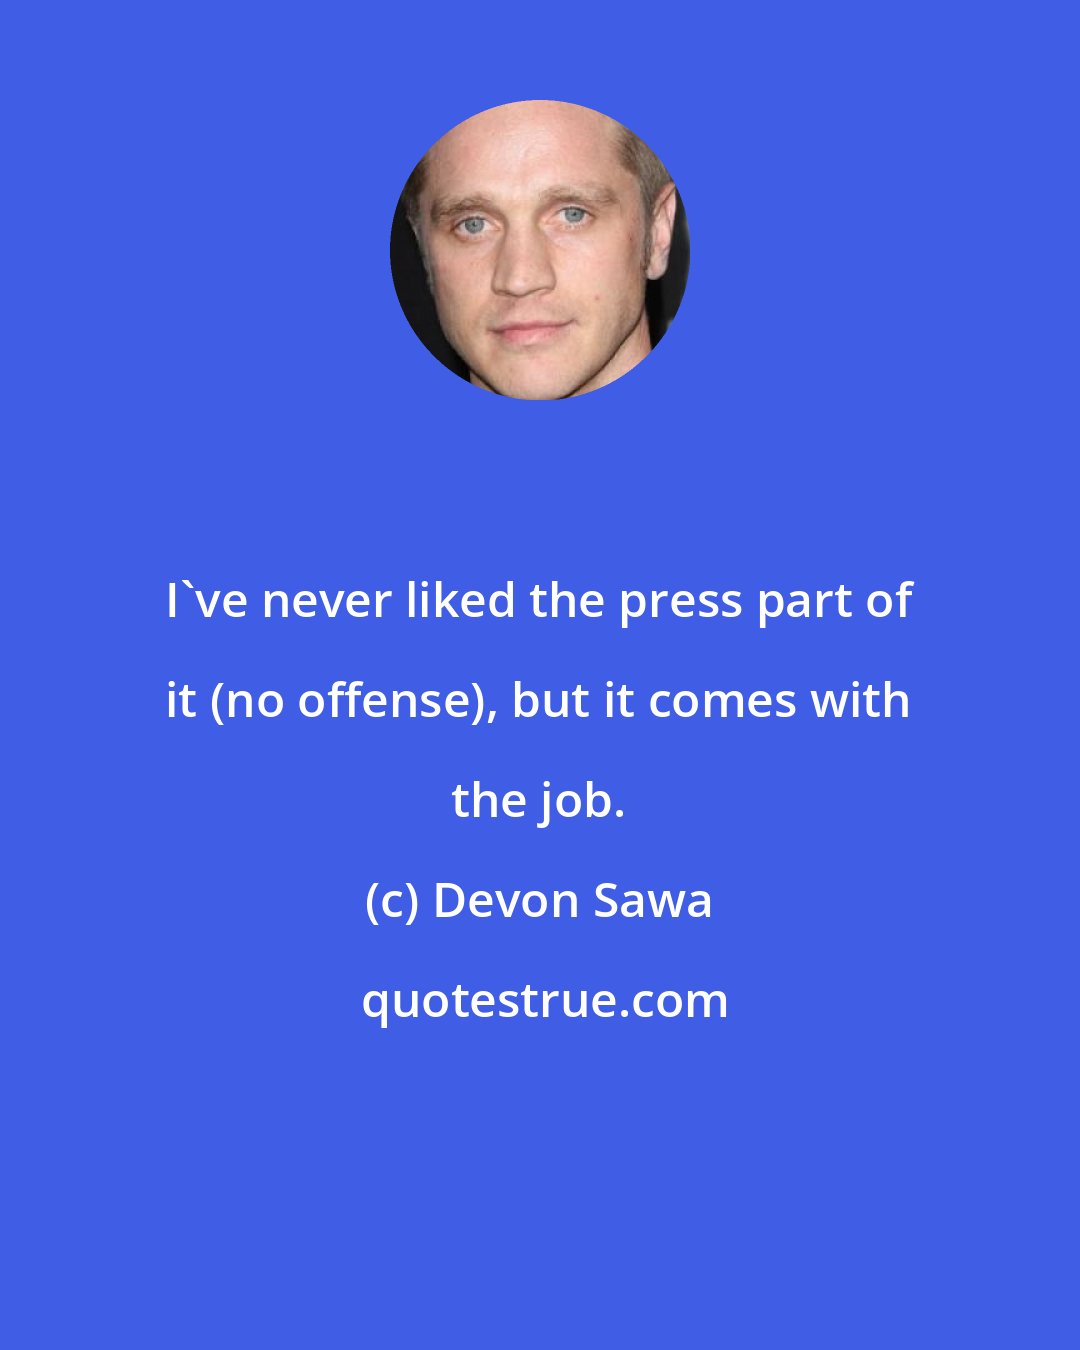 Devon Sawa: I've never liked the press part of it (no offense), but it comes with the job.